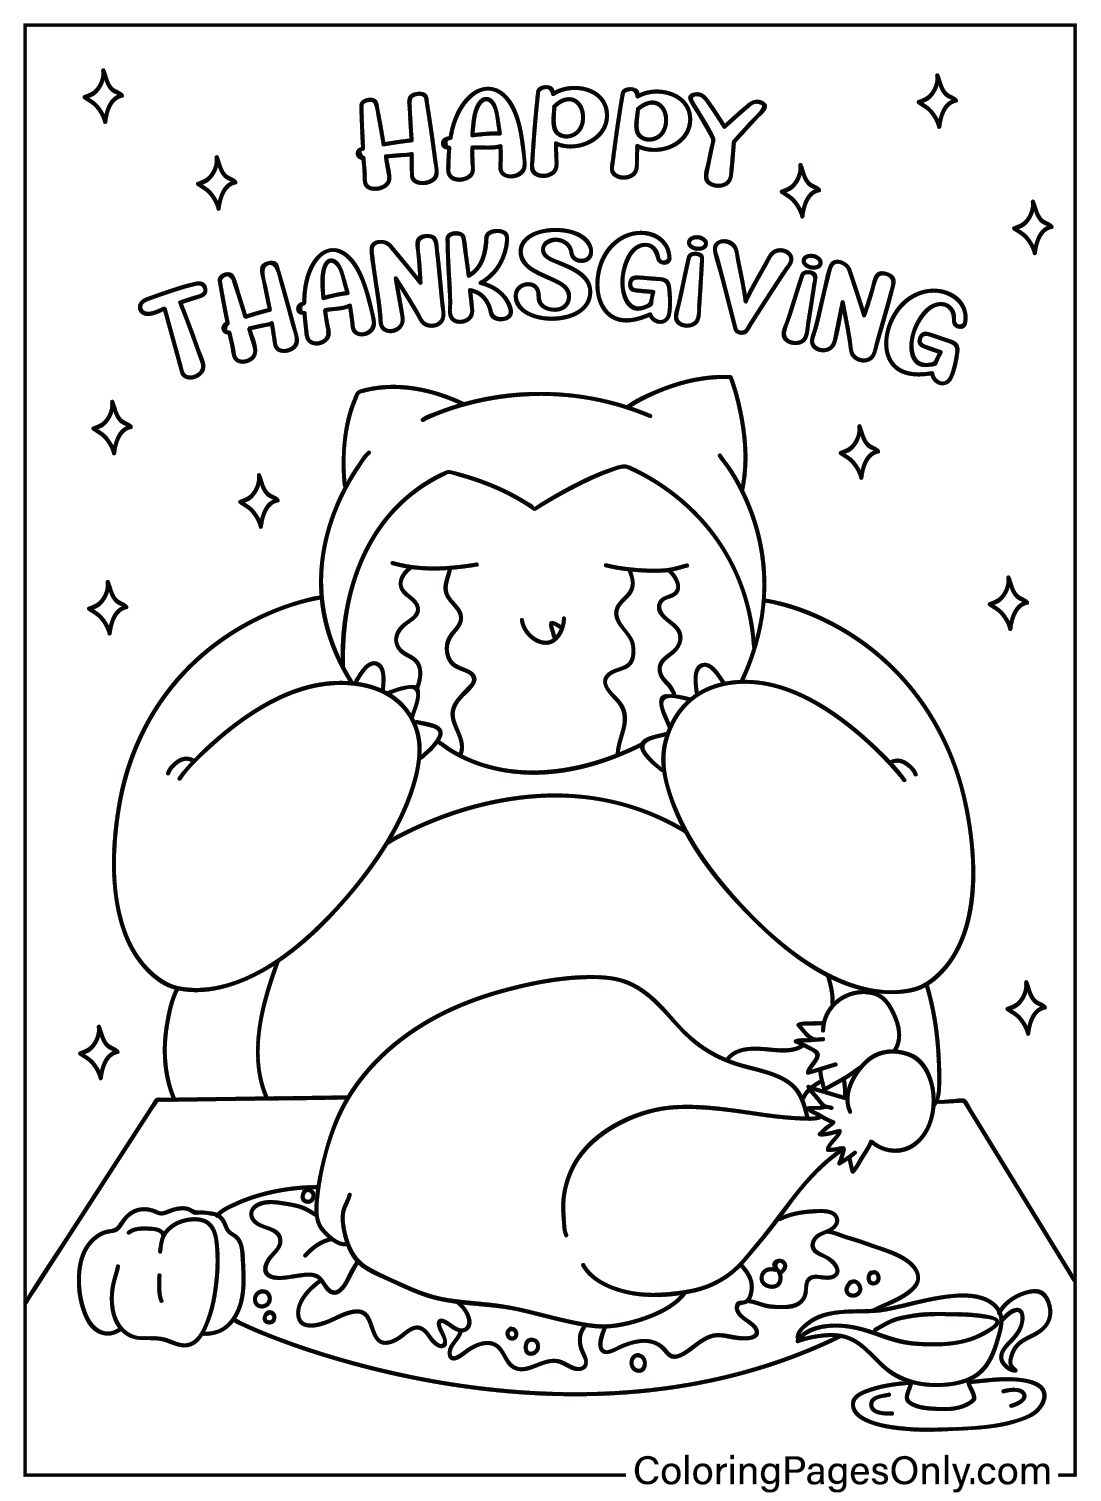 Thanksgiving Pokemon Coloring Page from Thanksgiving Cartoon